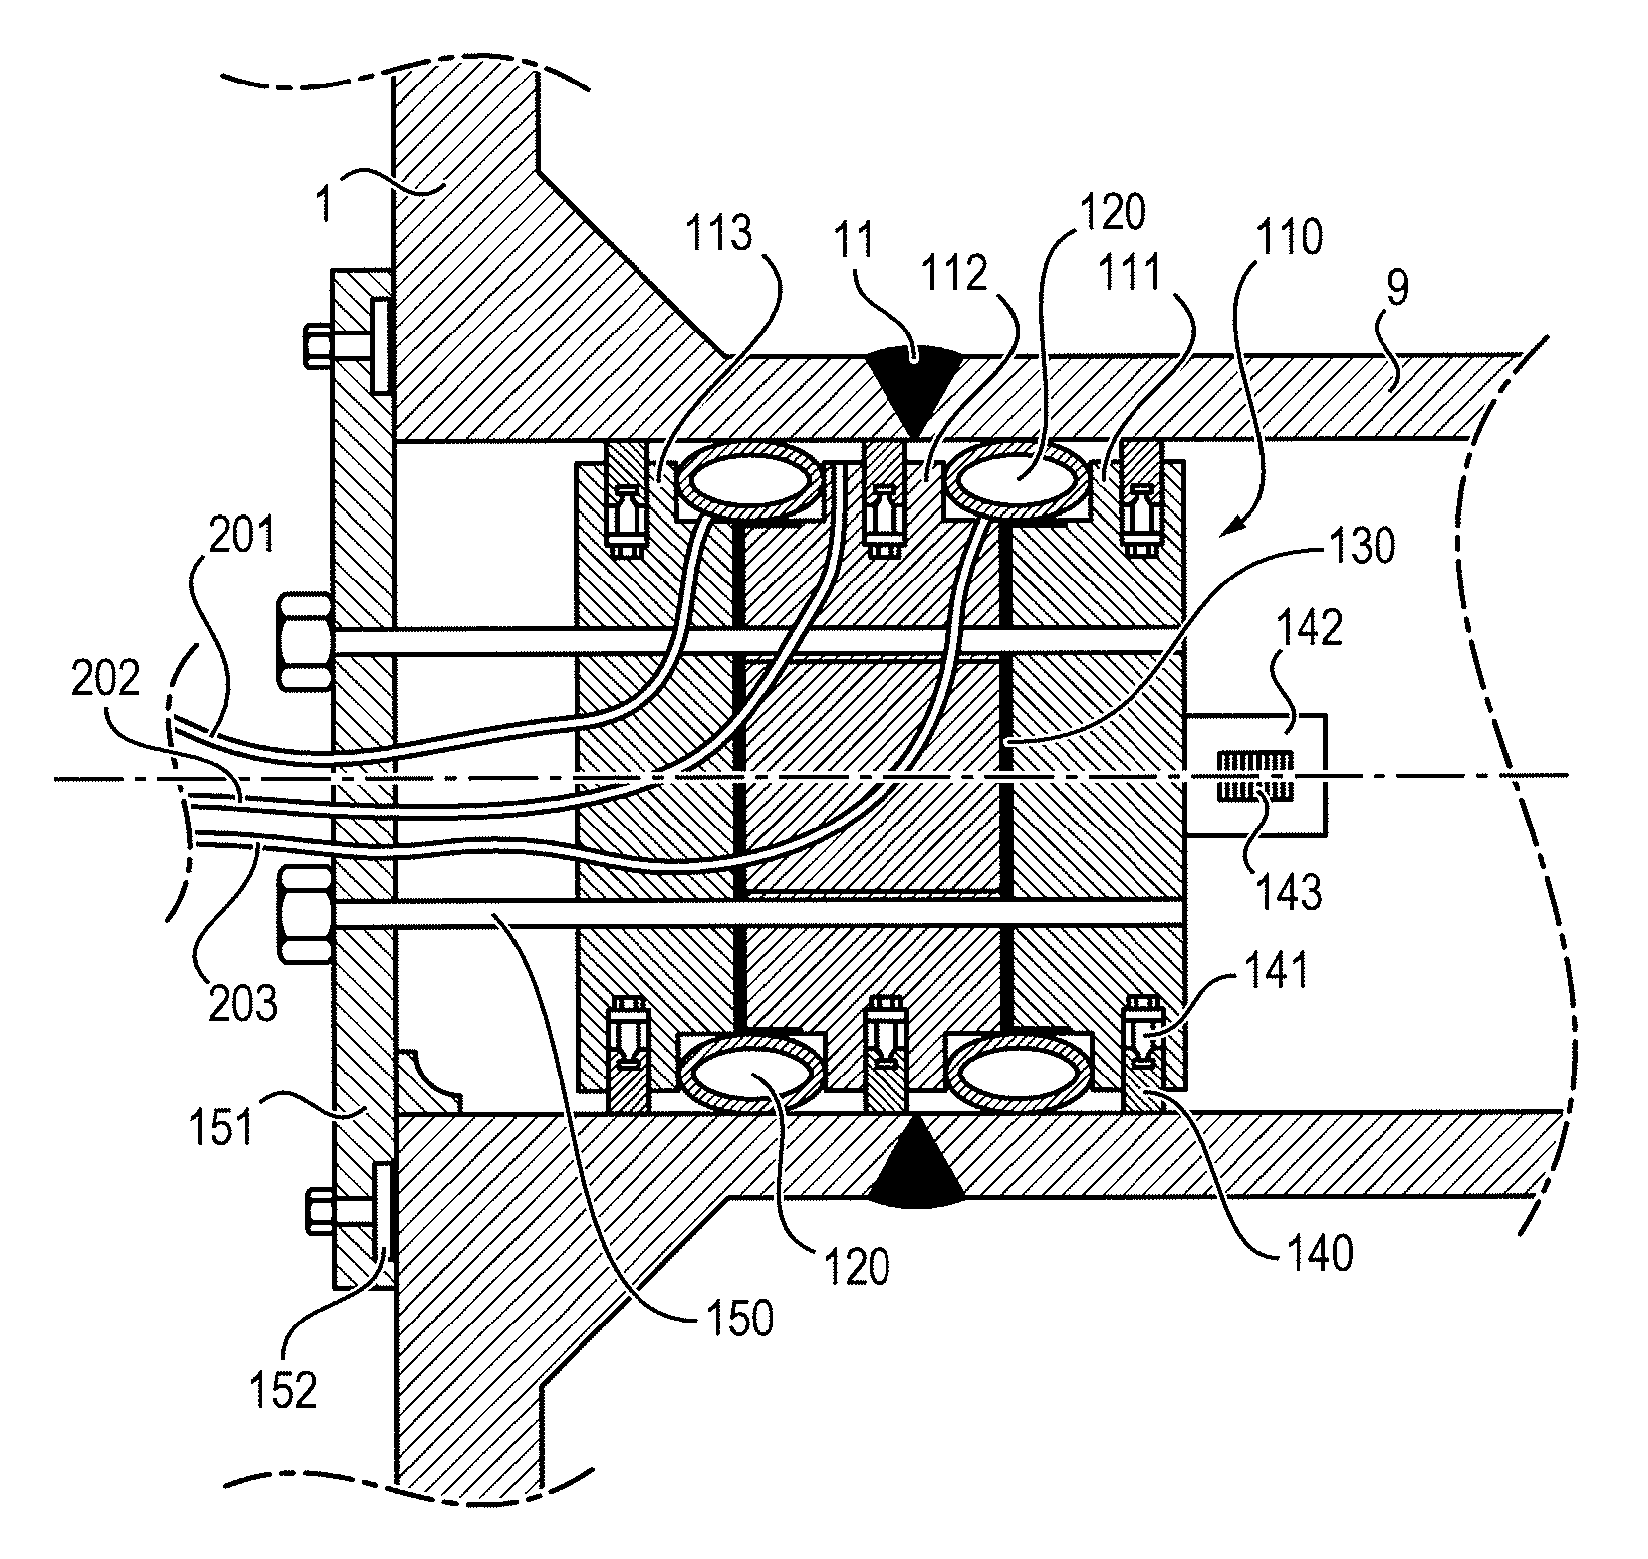 Pipe-closing device for isolating a tank, a pipe or a set of tanks and pipes